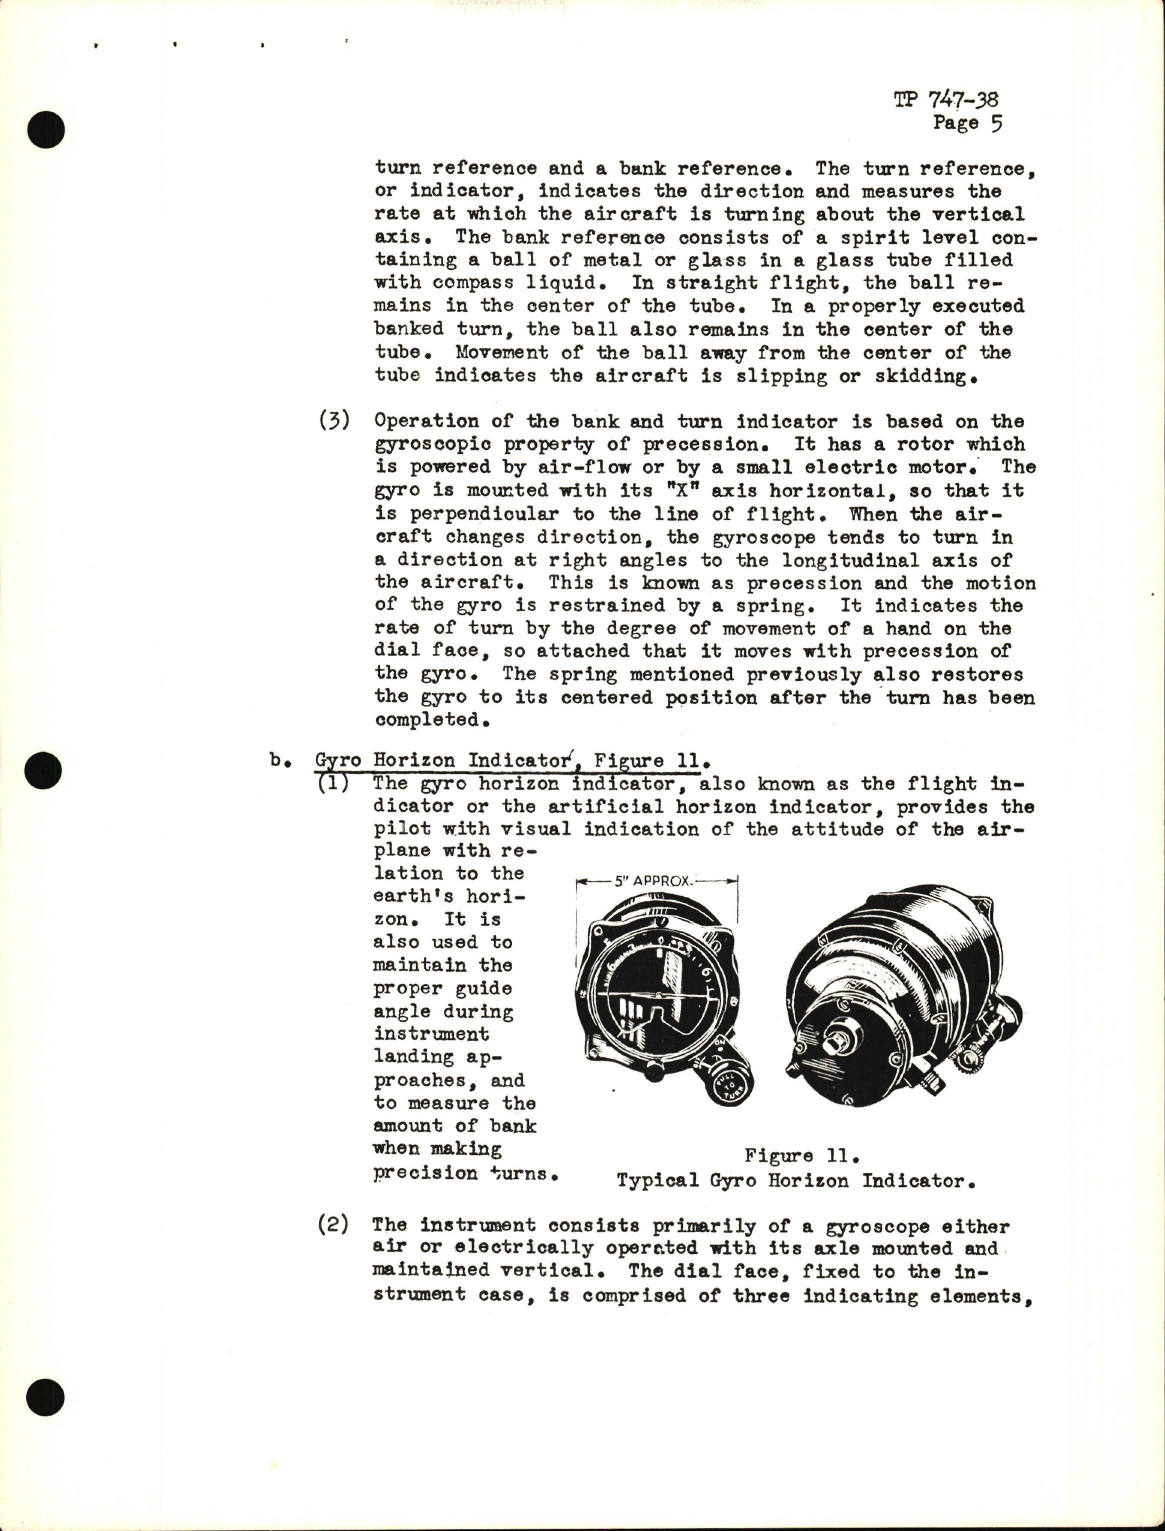 Sample page 5 from AirCorps Library document: Training Project, Gyroscopic Instruments